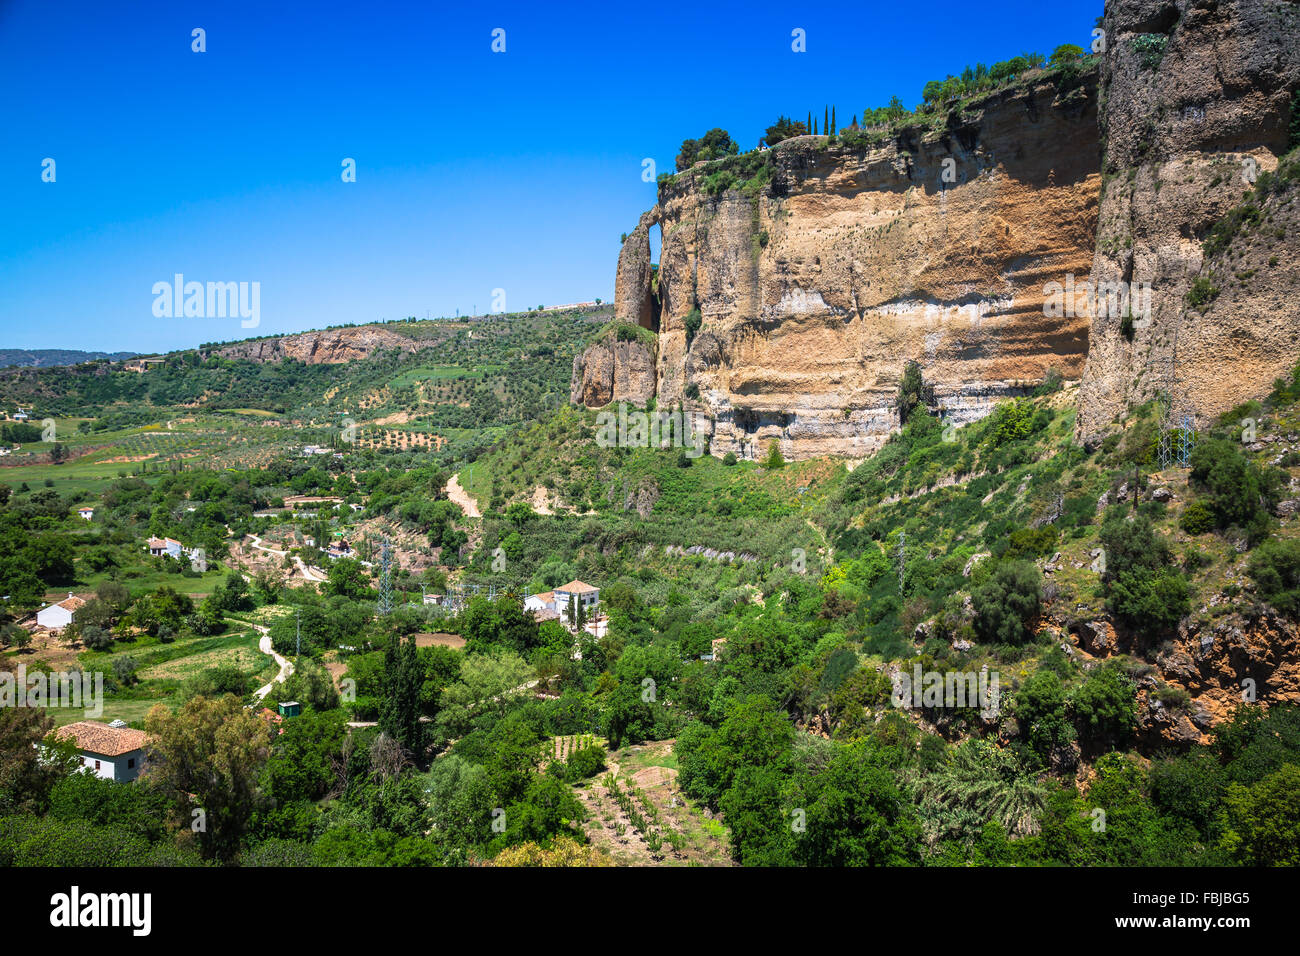 view of buildings over cliff in ronda, spain Stock Photo